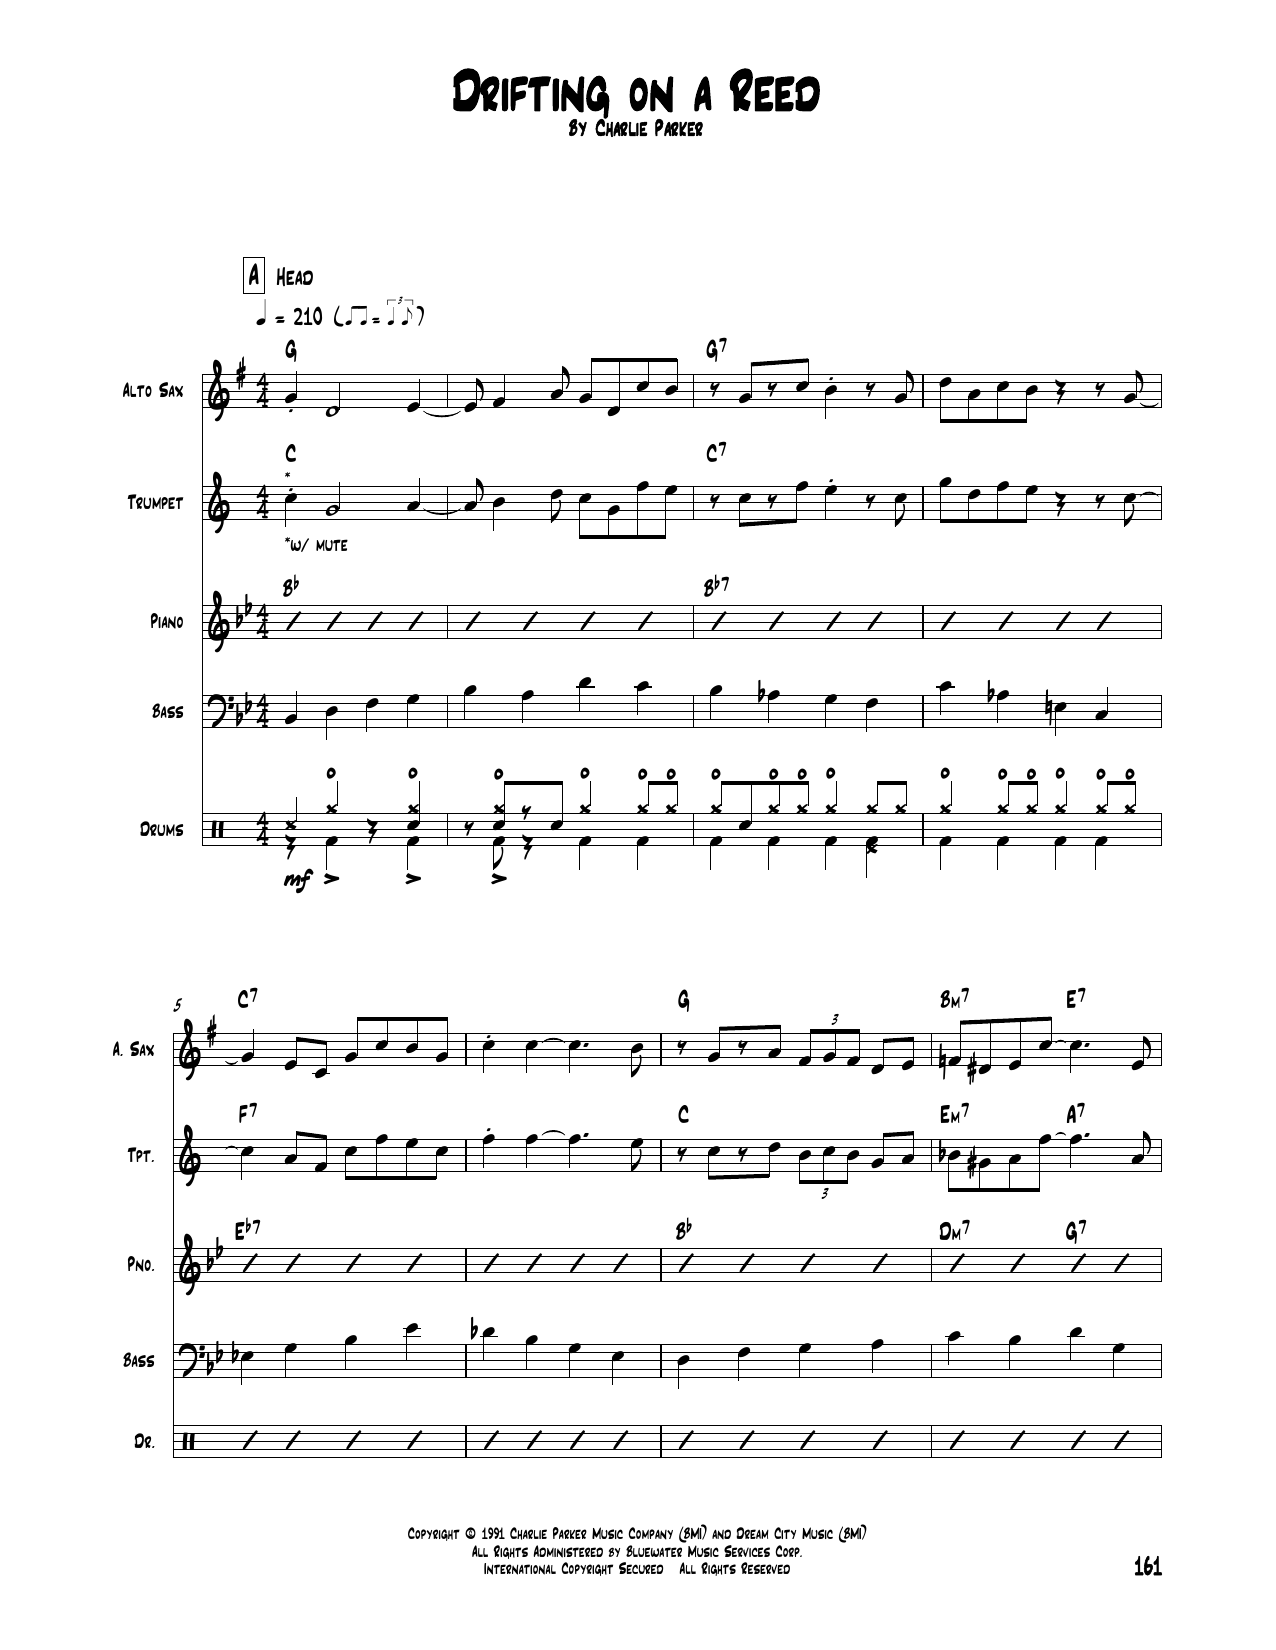 Download Charlie Parker Drifting On A Reed Sheet Music